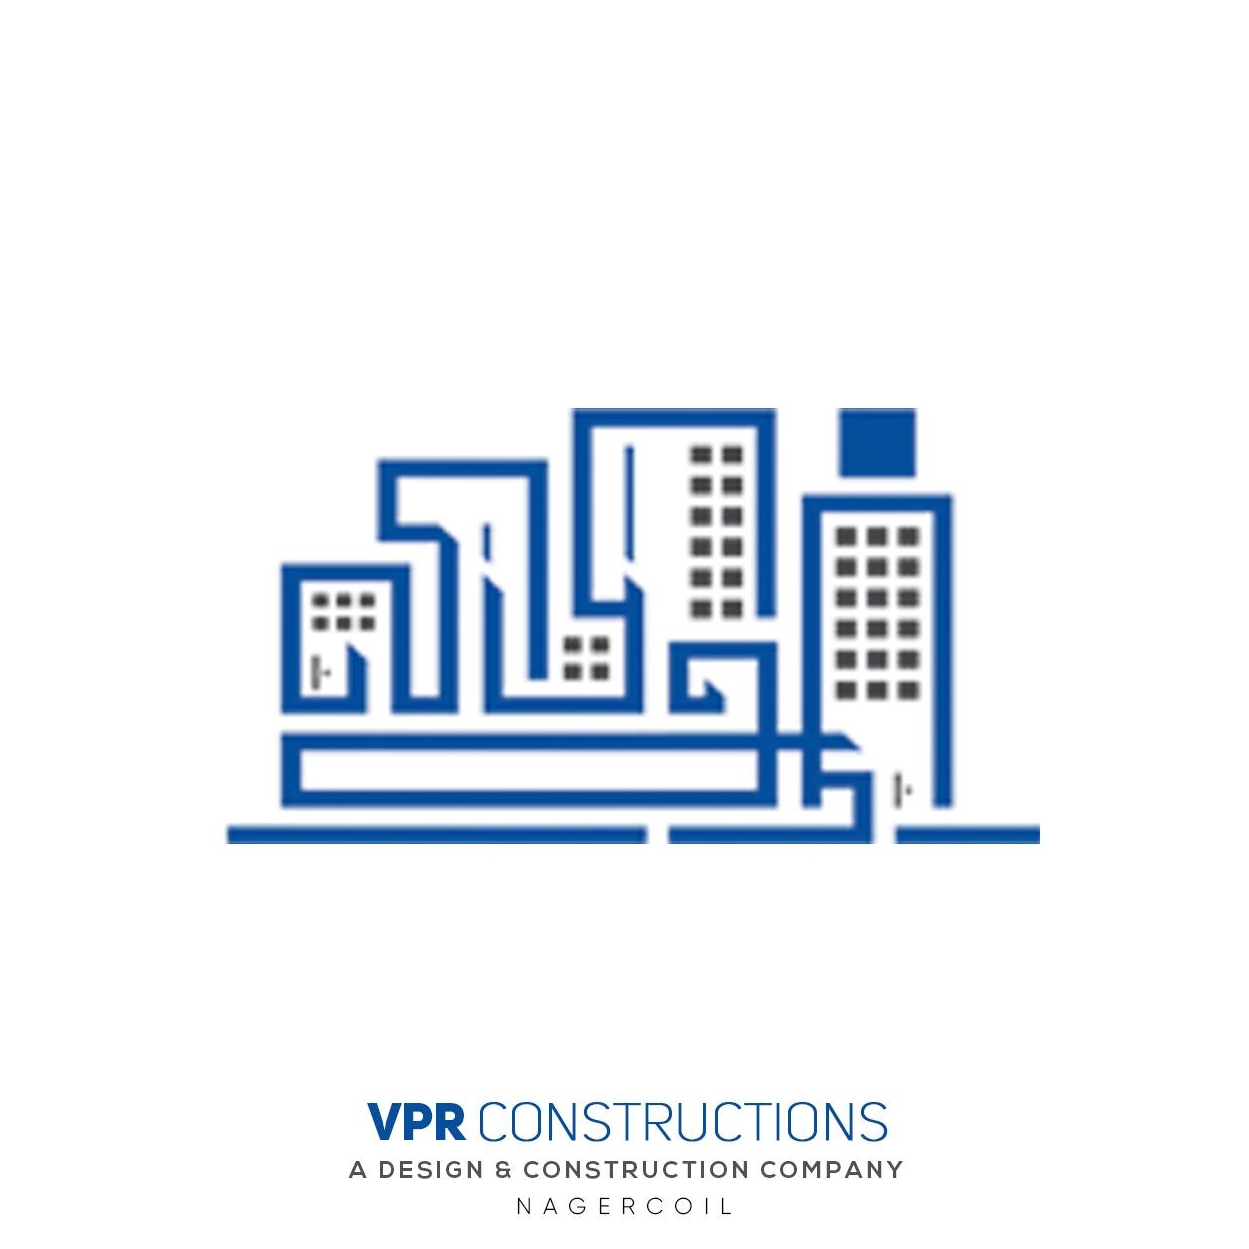 VPR CONSTRUCTIONS|IT Services|Professional Services